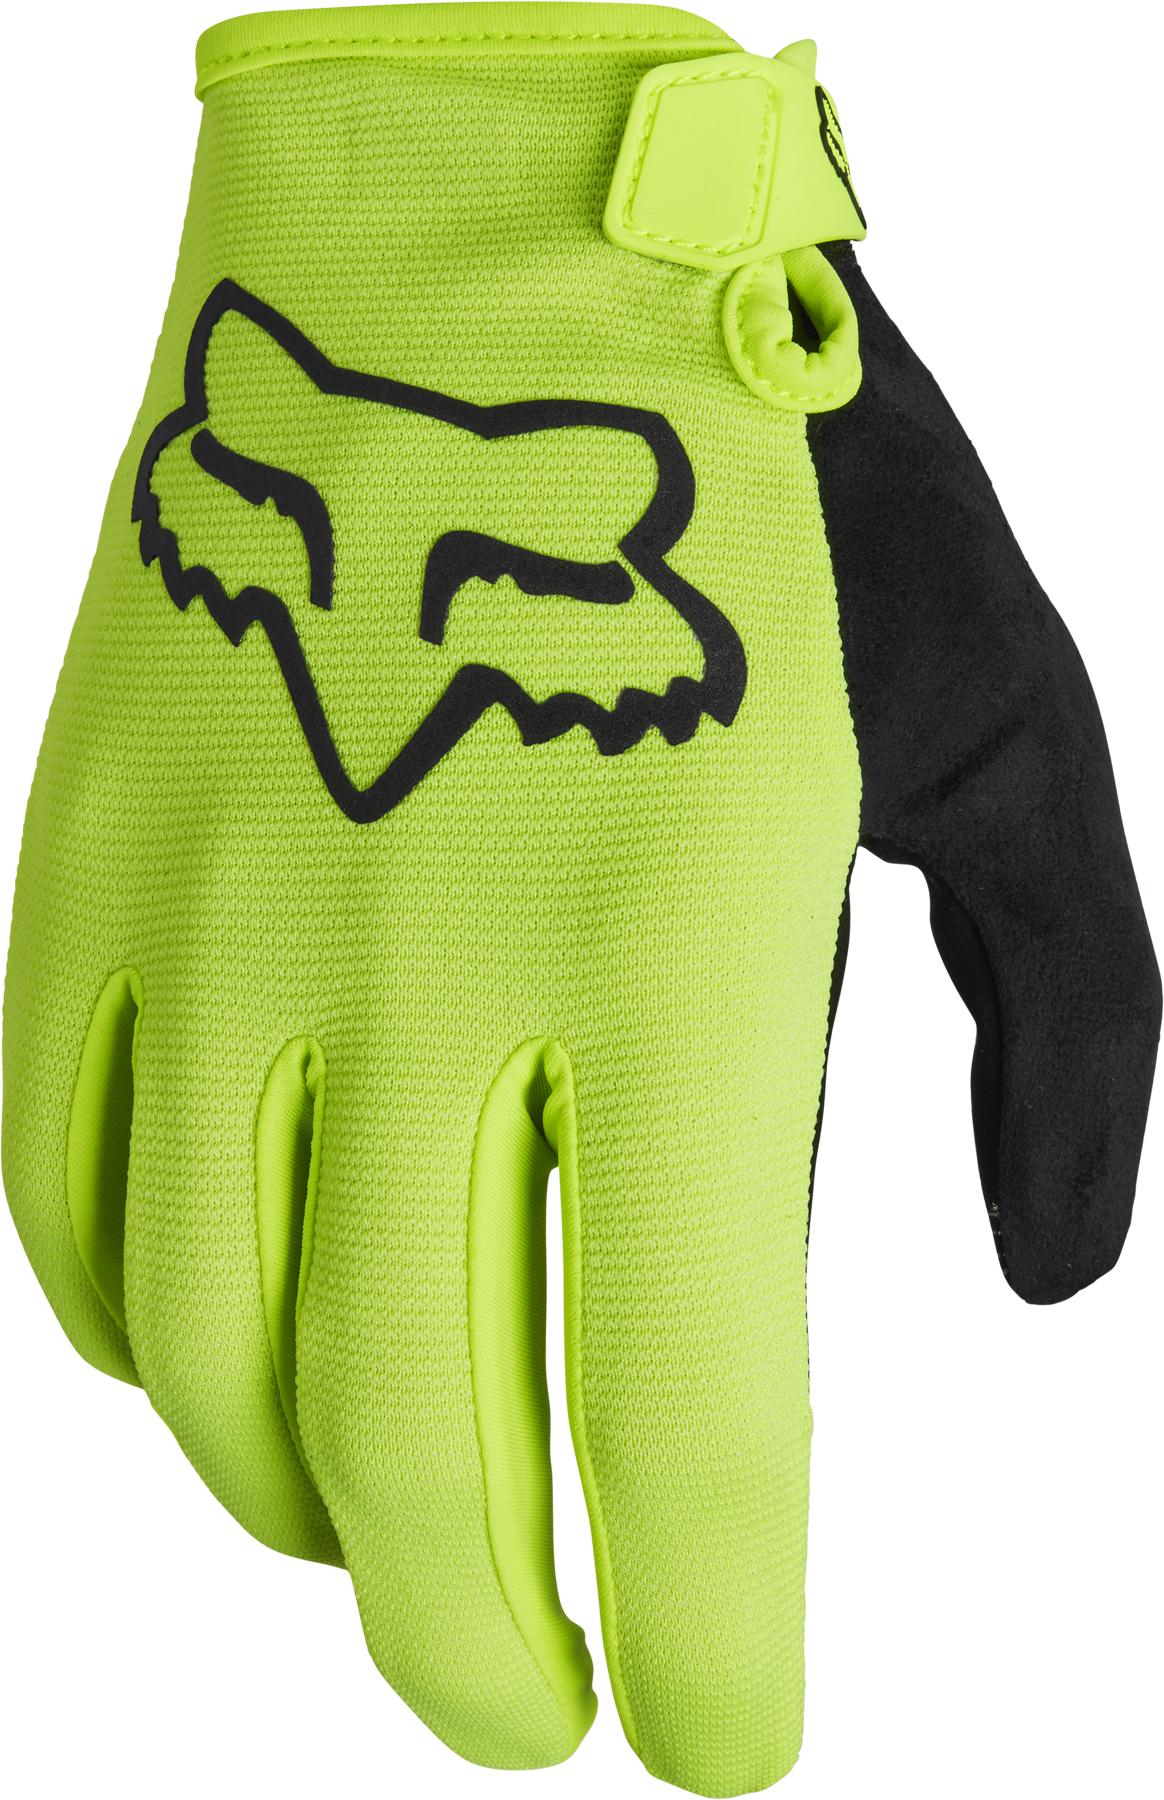 Fox Racing Youth Ranger Cycling Gloves - Fluorescent Yellow